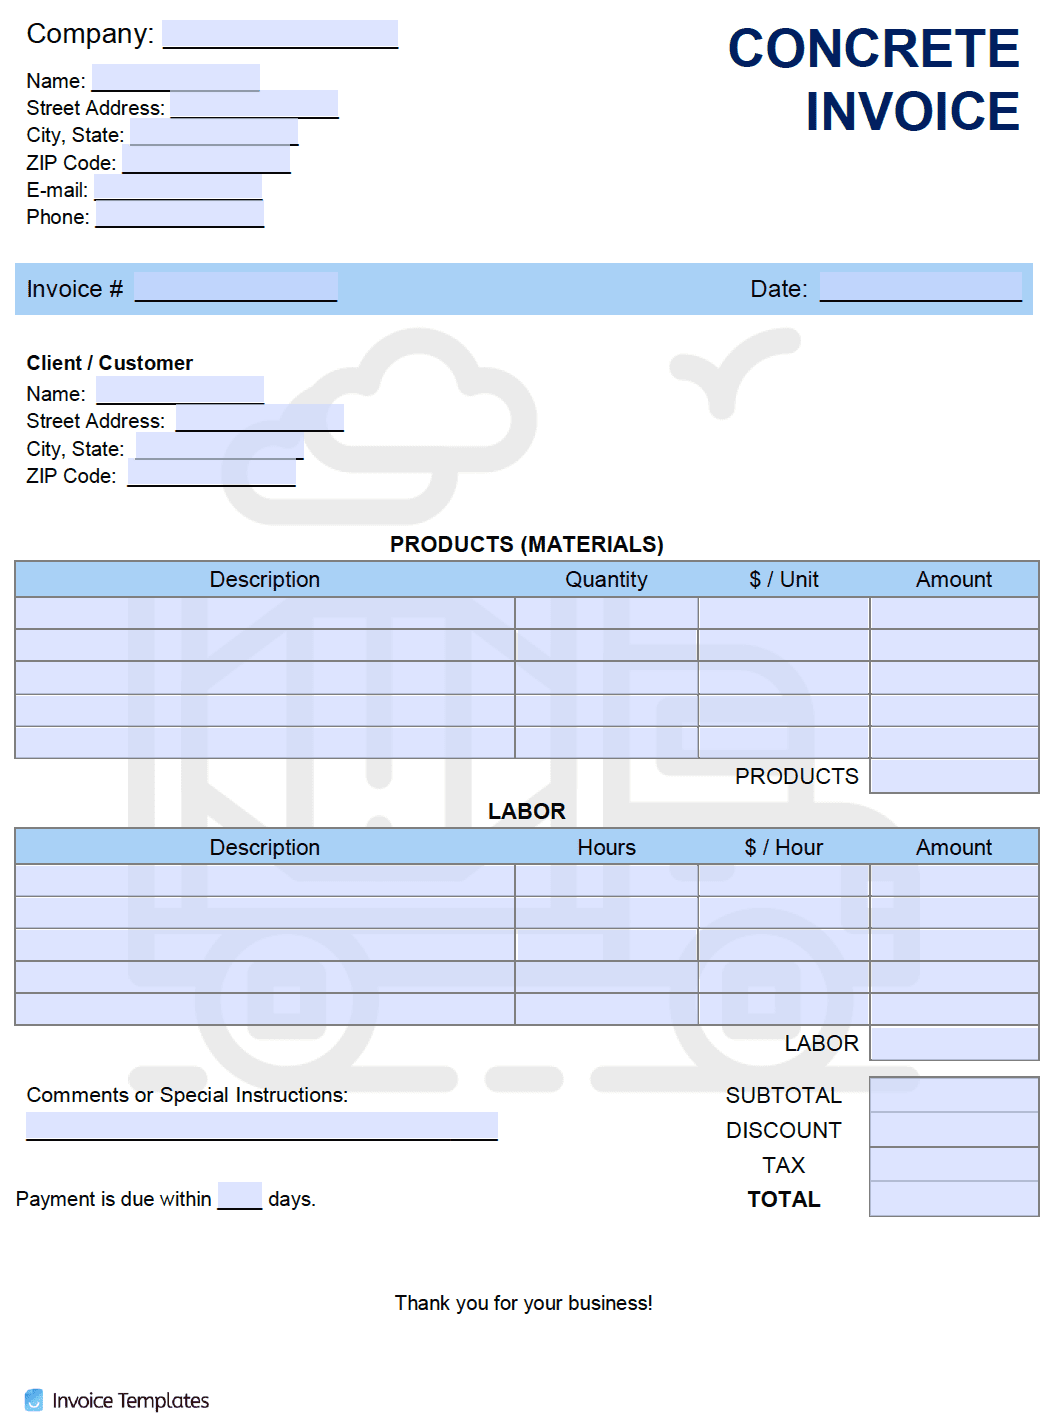 Independent Contractor (1099) Invoice Templates PDF WORD EXCEL